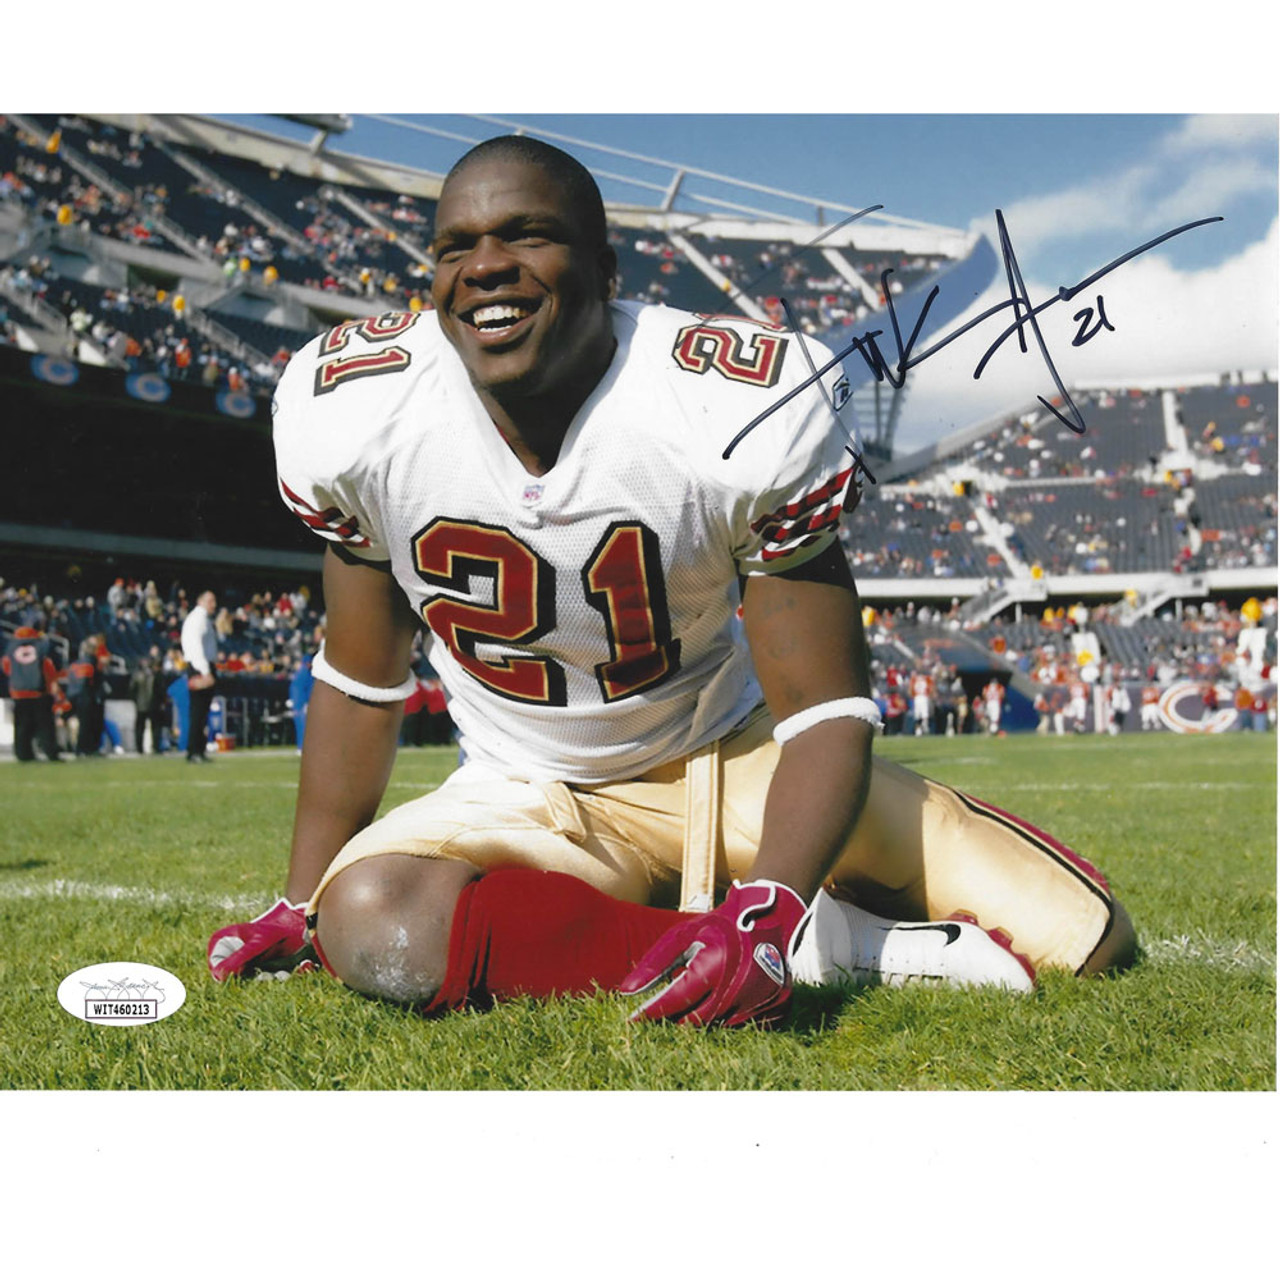 NFL San Francisco 49ers Frank Gore #21 8x10 Autographed Signed Picture JSA  Auth - Sinbad Sports Store